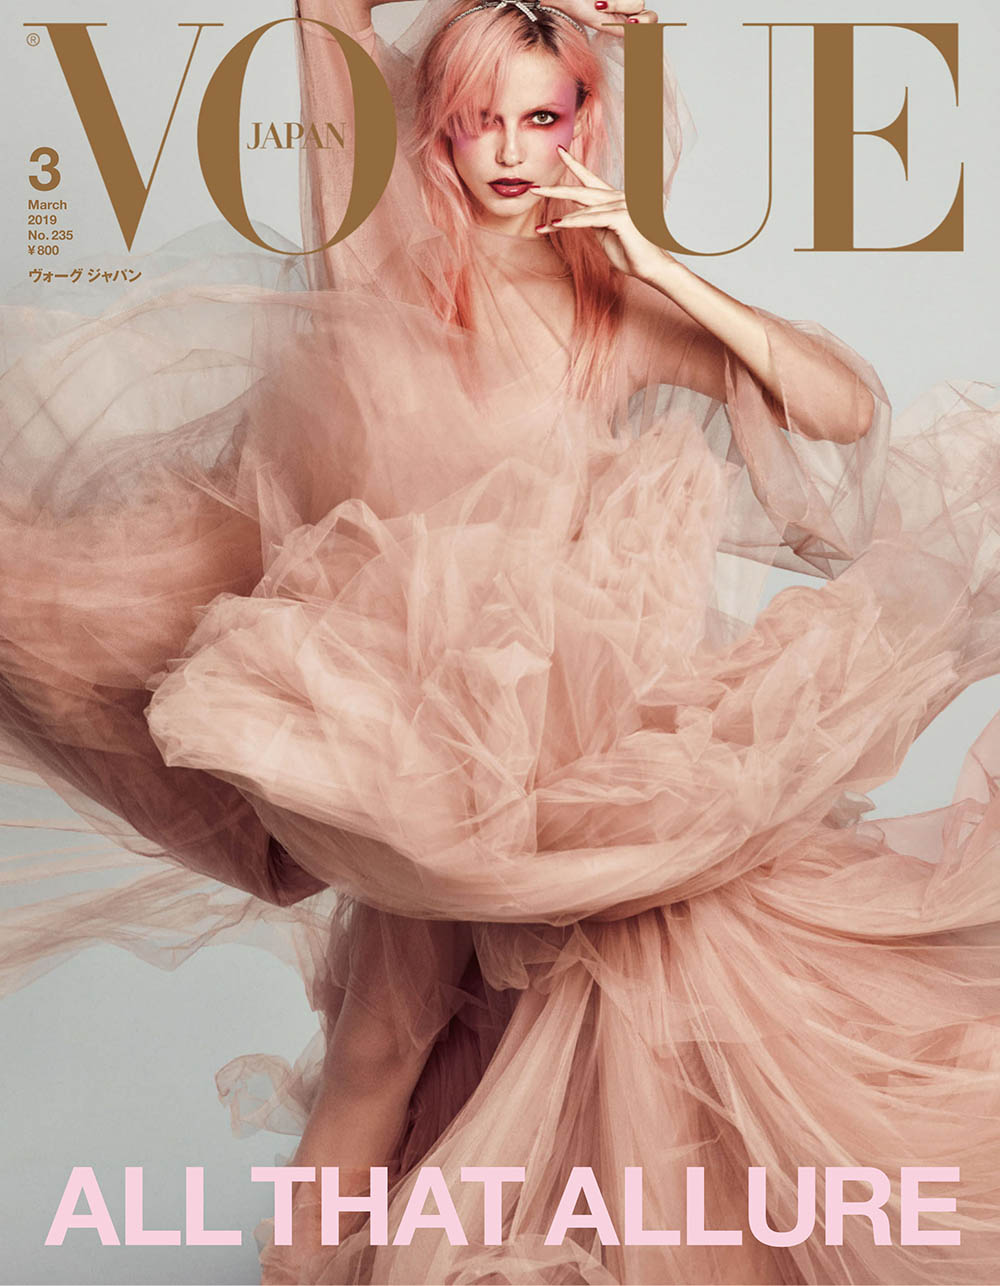 Vogue Japan March 2019 covers by Luigi & Iango